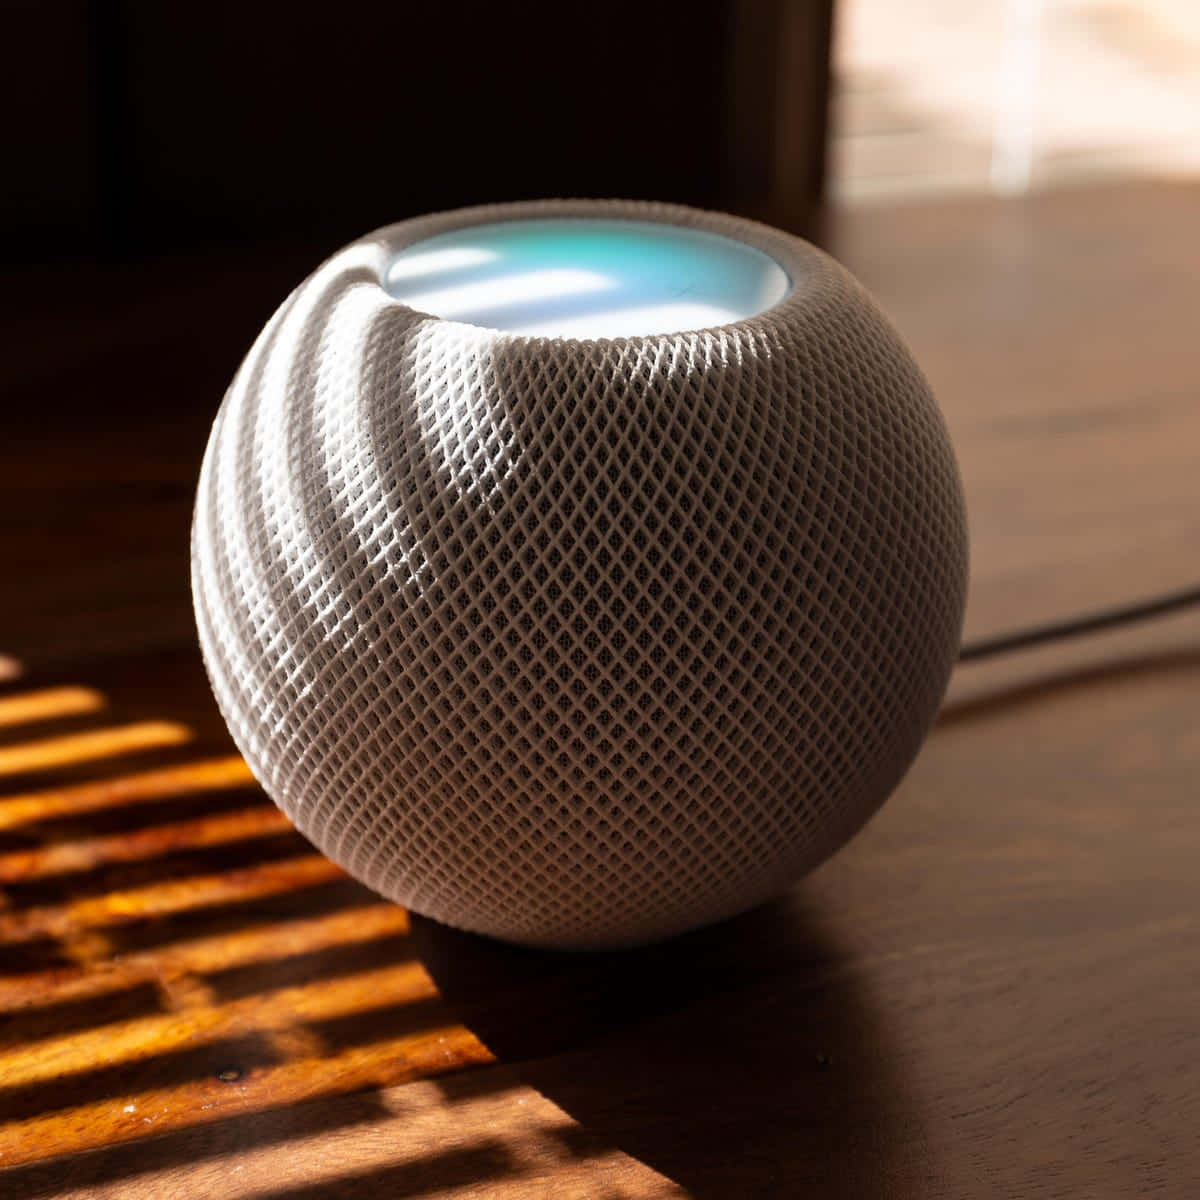 The Sleek And Stylish Apple Homepod, Perfect For Any Home Decor. Wallpaper